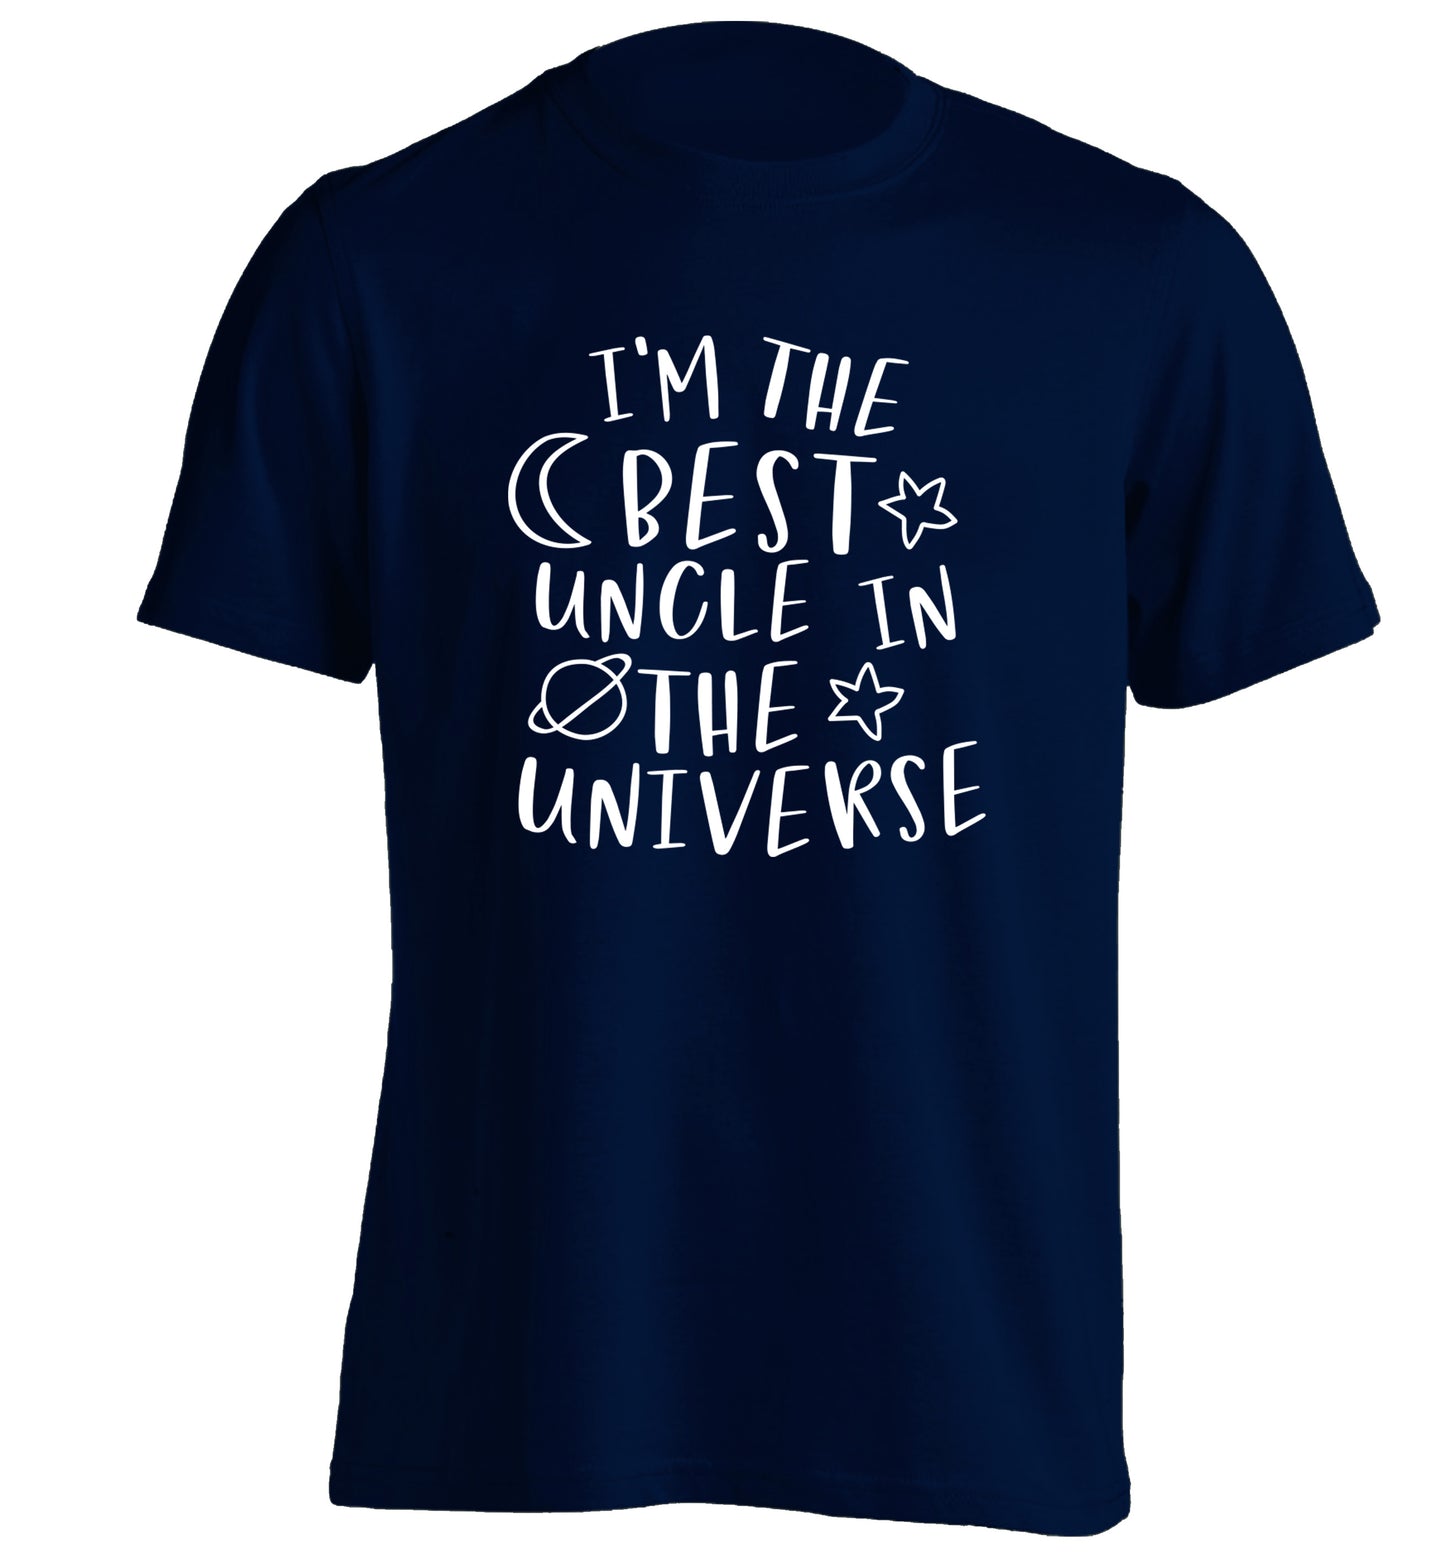 I'm the best uncle in the universe adults unisex navy Tshirt 2XL